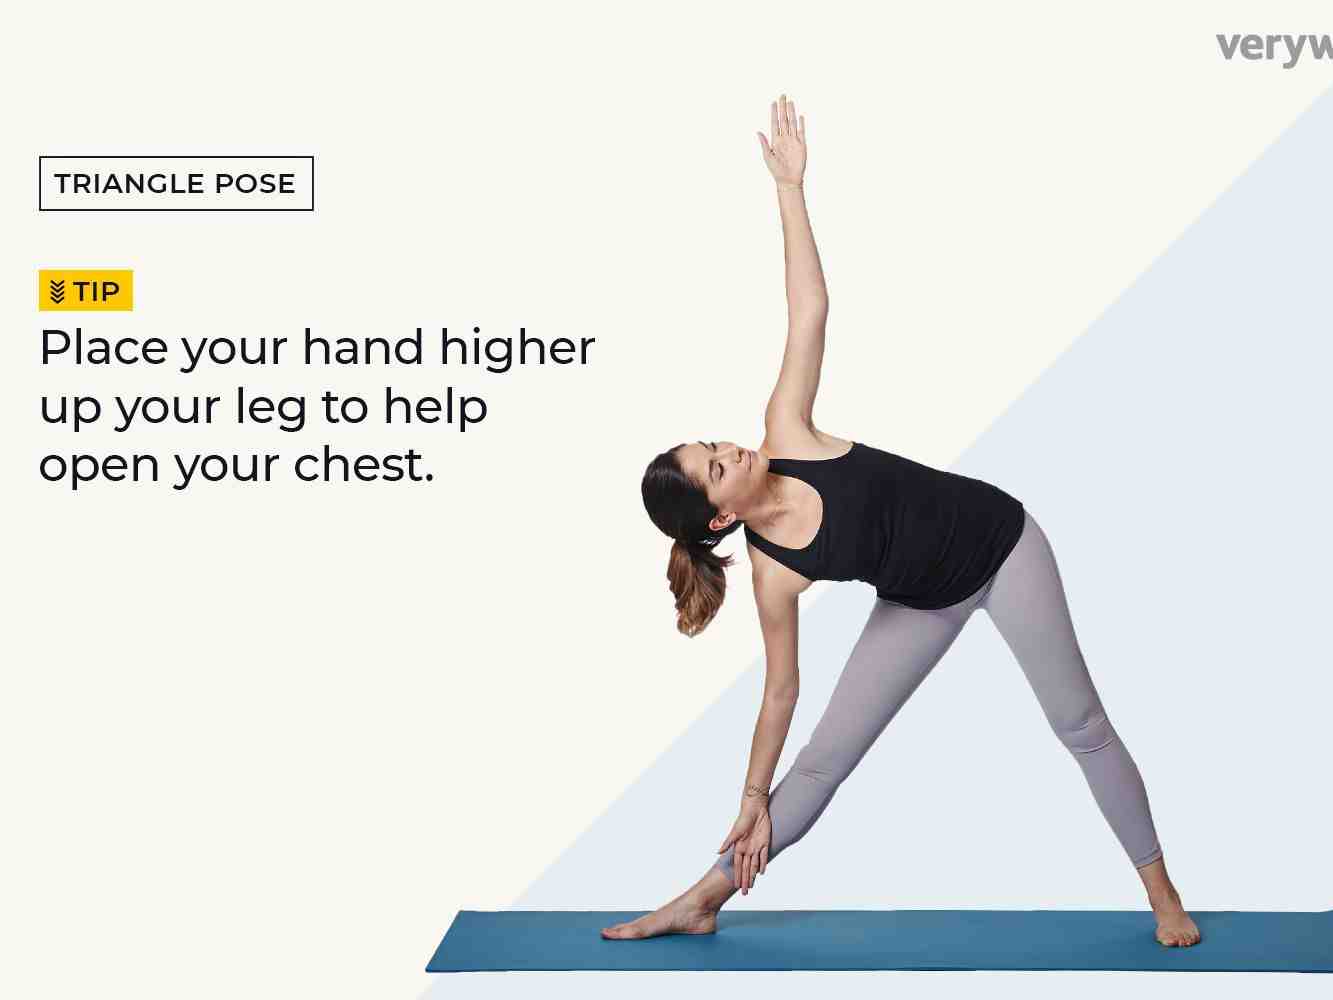 What does triangle pose represent?